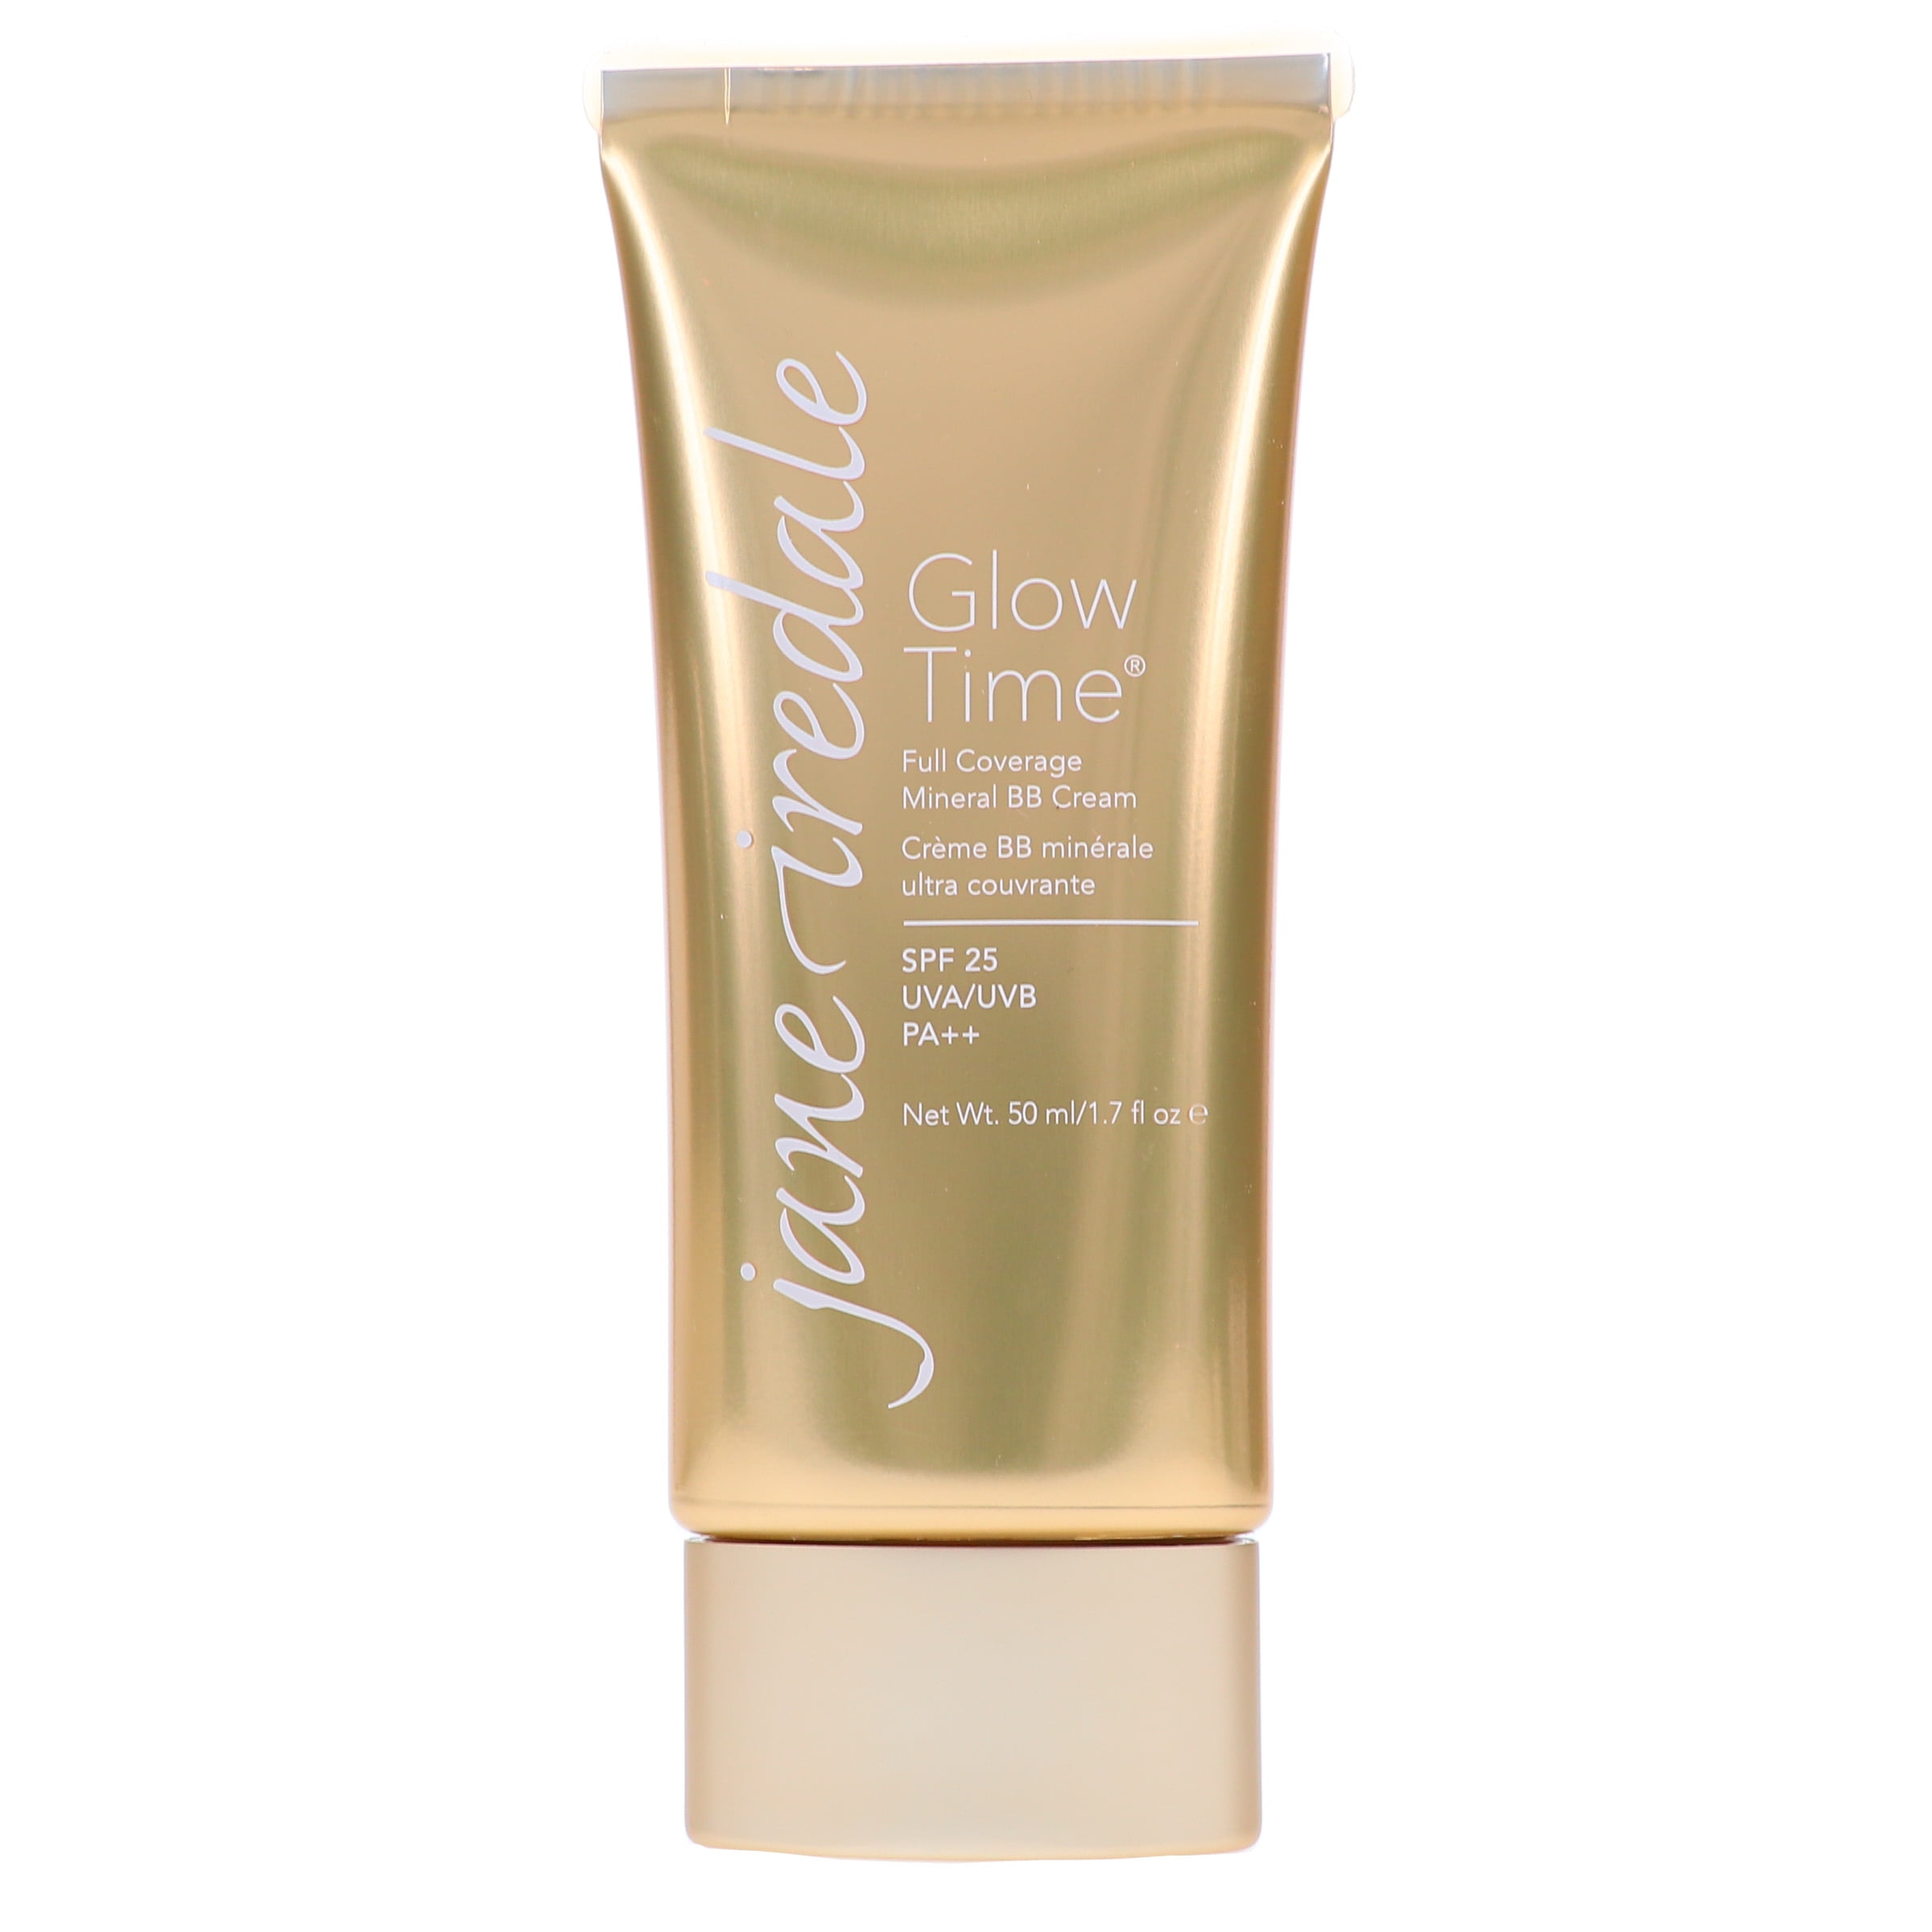 Jane Iredale Glow time soltise.